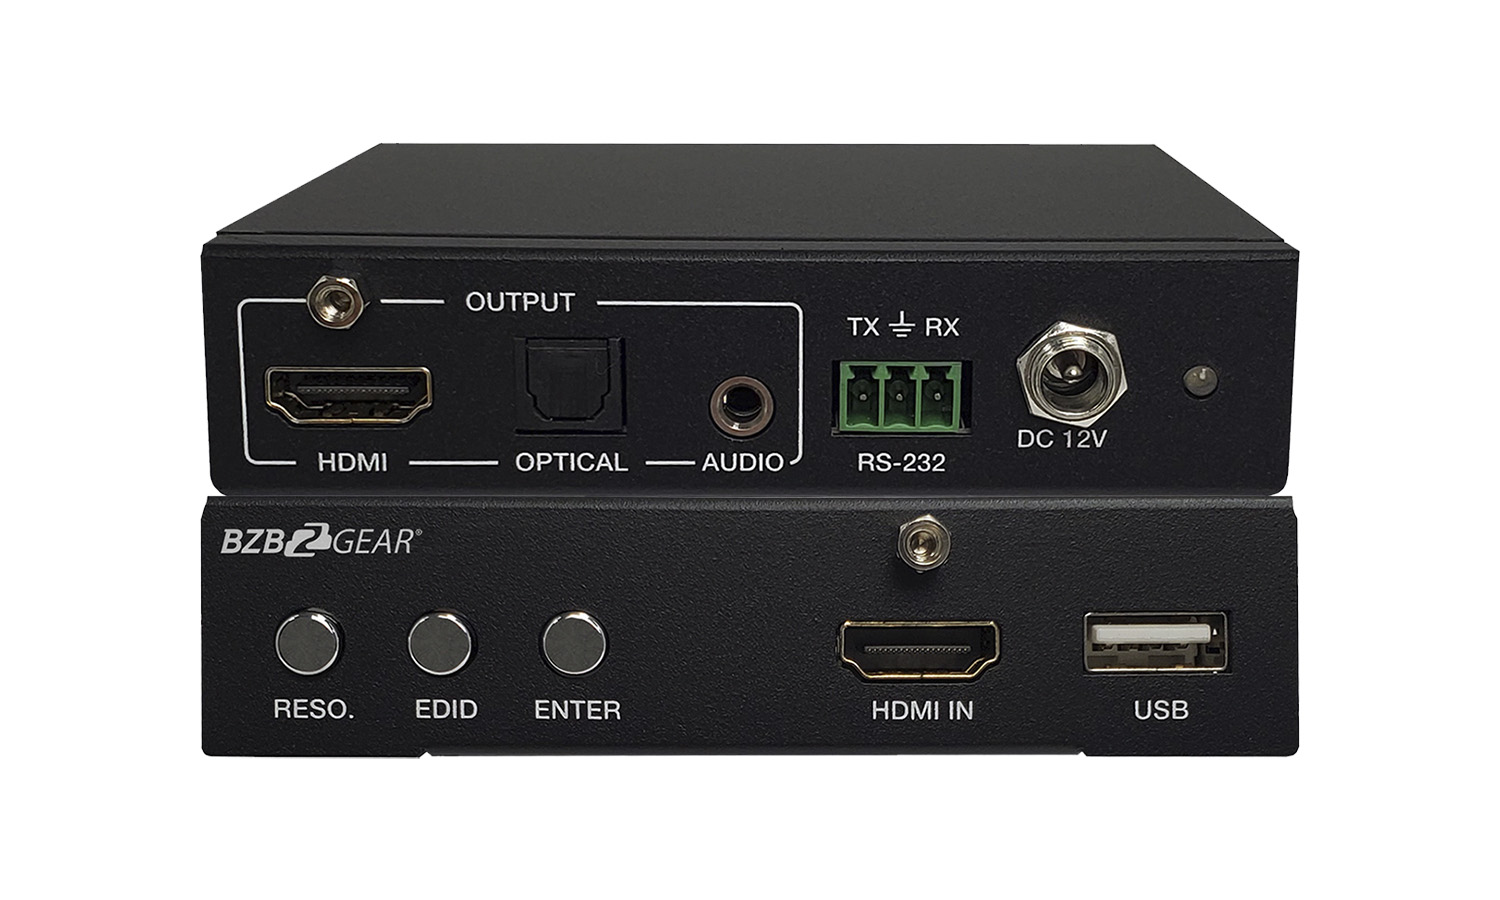 BG-HDMI4K-SC HDMI 2.0 4K 60Hz up/down Scaler with Analog and Optical Audio Extractor by BZBGEAR